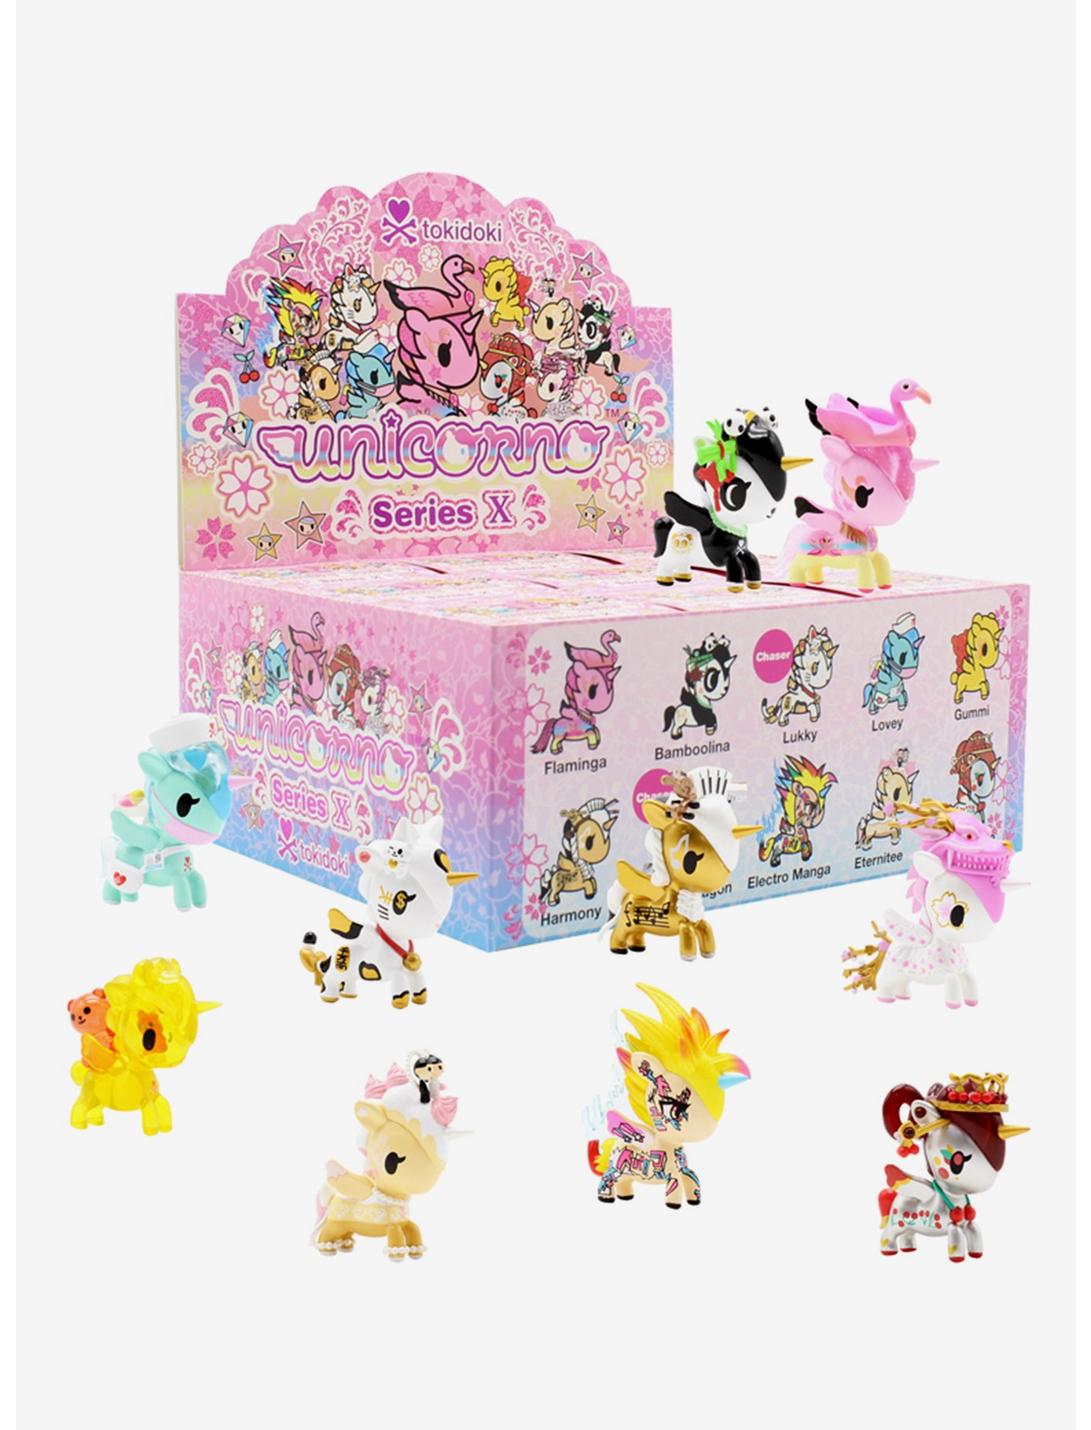 From Cherry Blossom Series 1 2020 for sale online tokidoki Unicorno Set of 4 no Chase